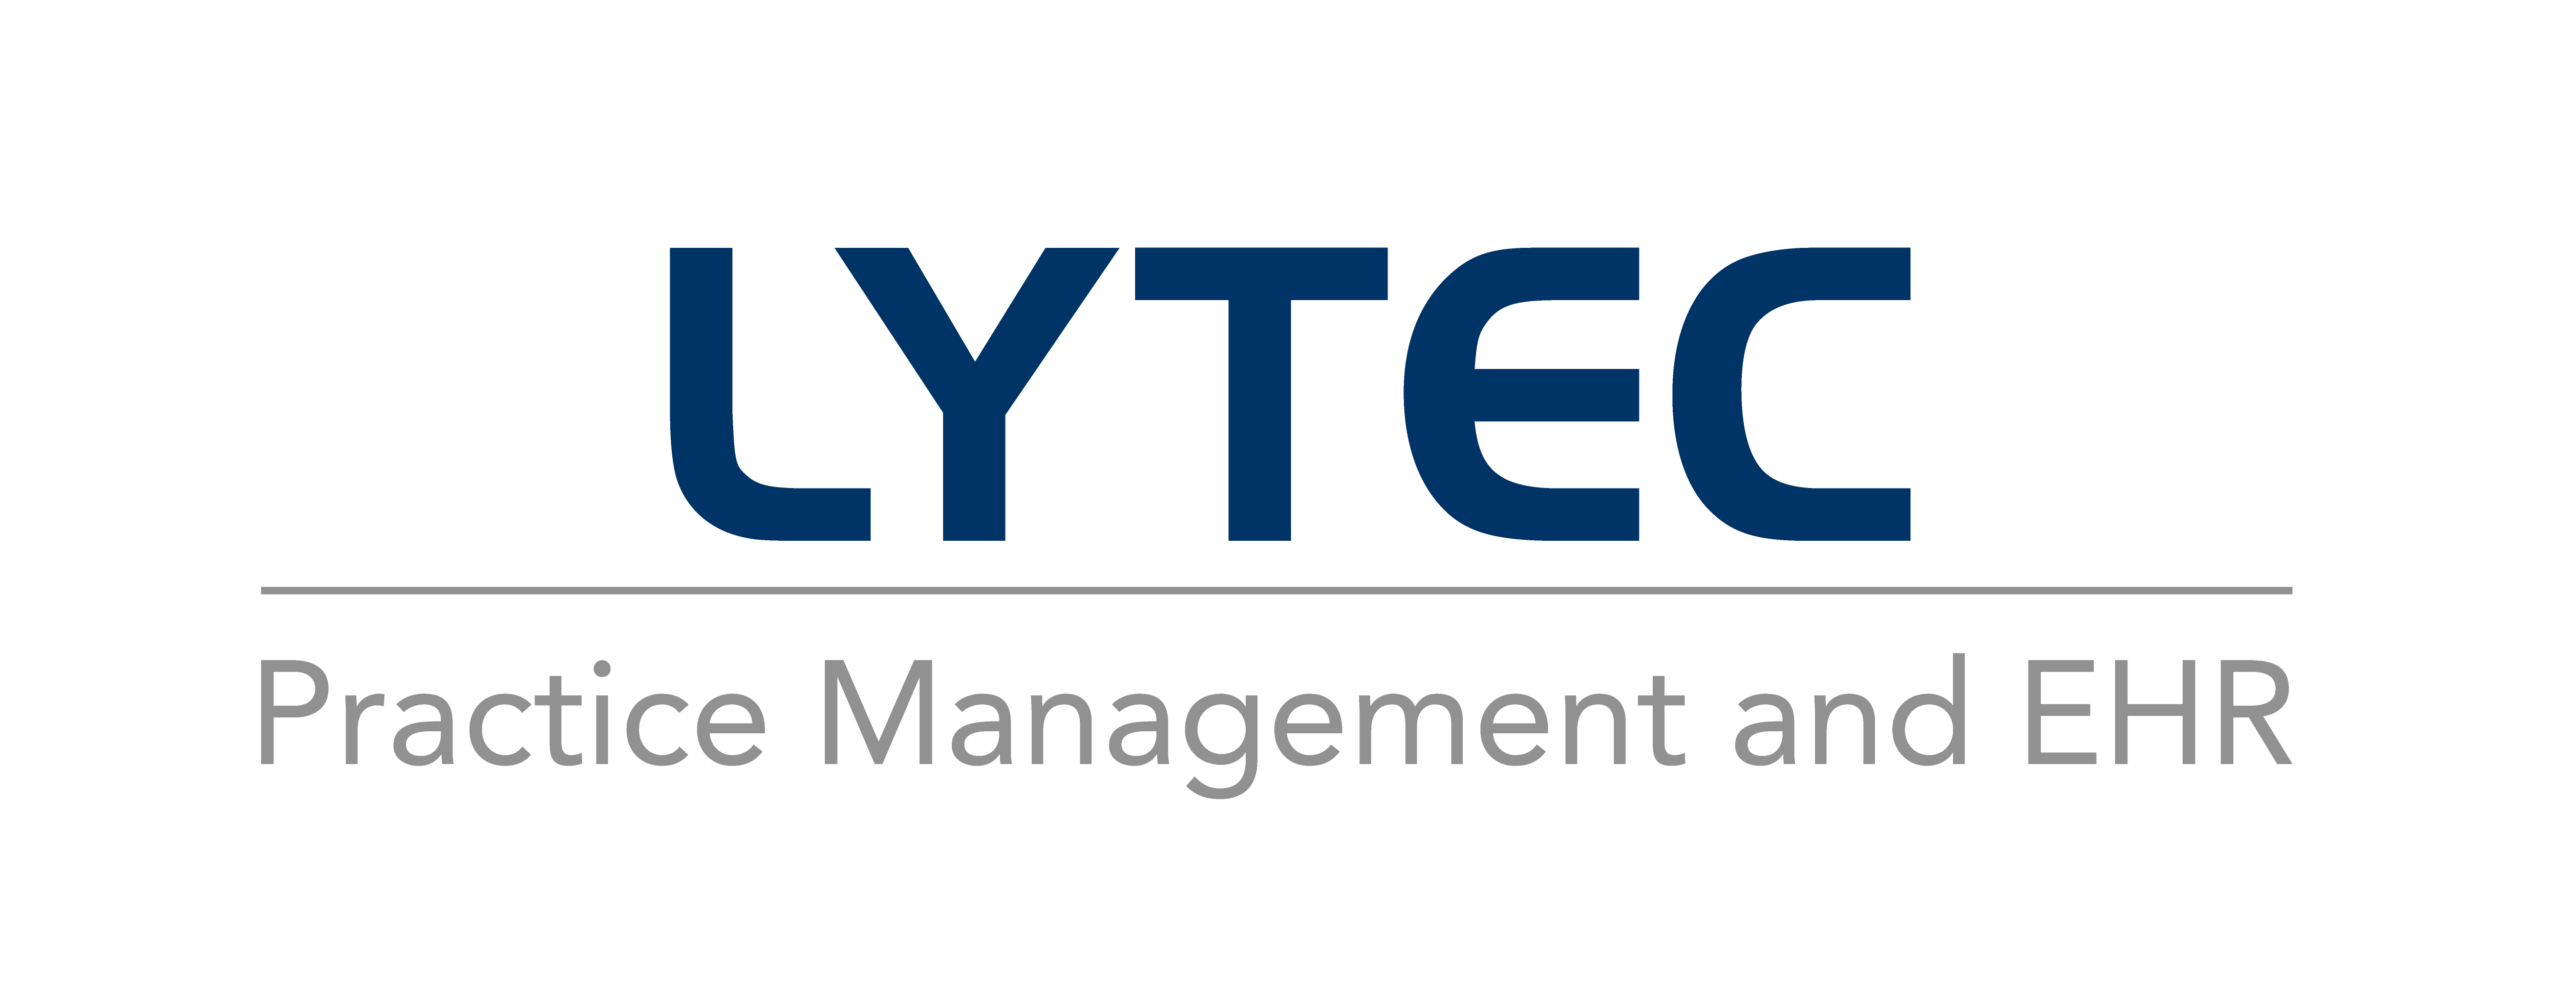 Lytec Online Support